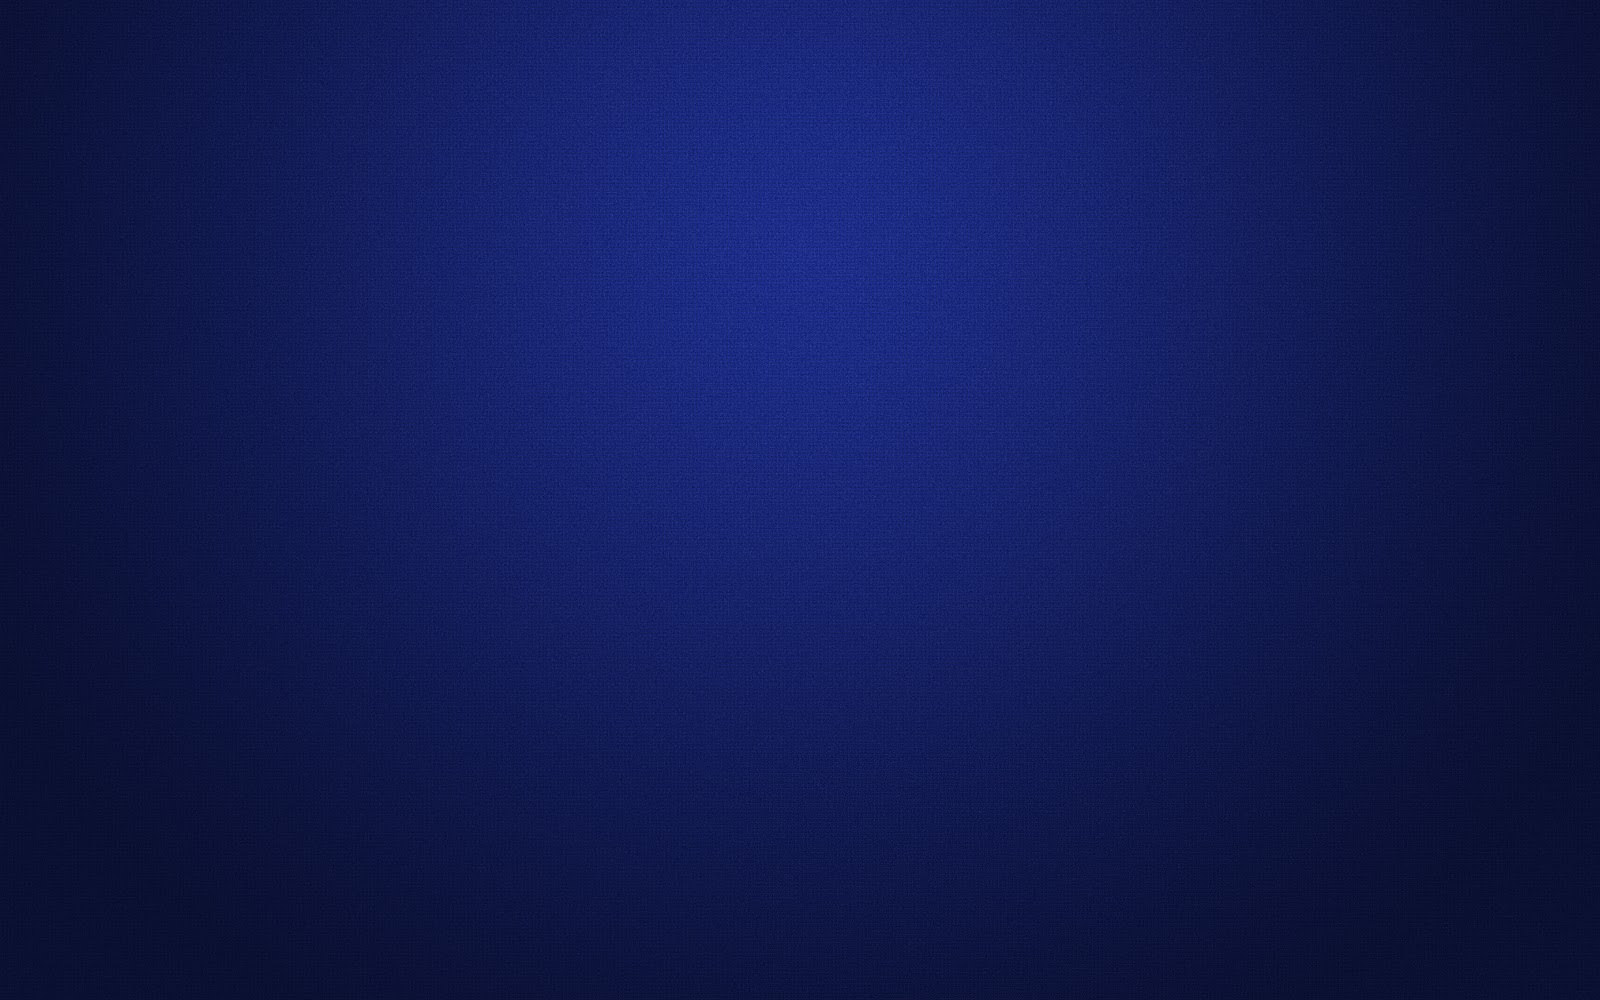 Free 30+ Dark Blue Backgrounds In Psd | Ai | Vector Eps